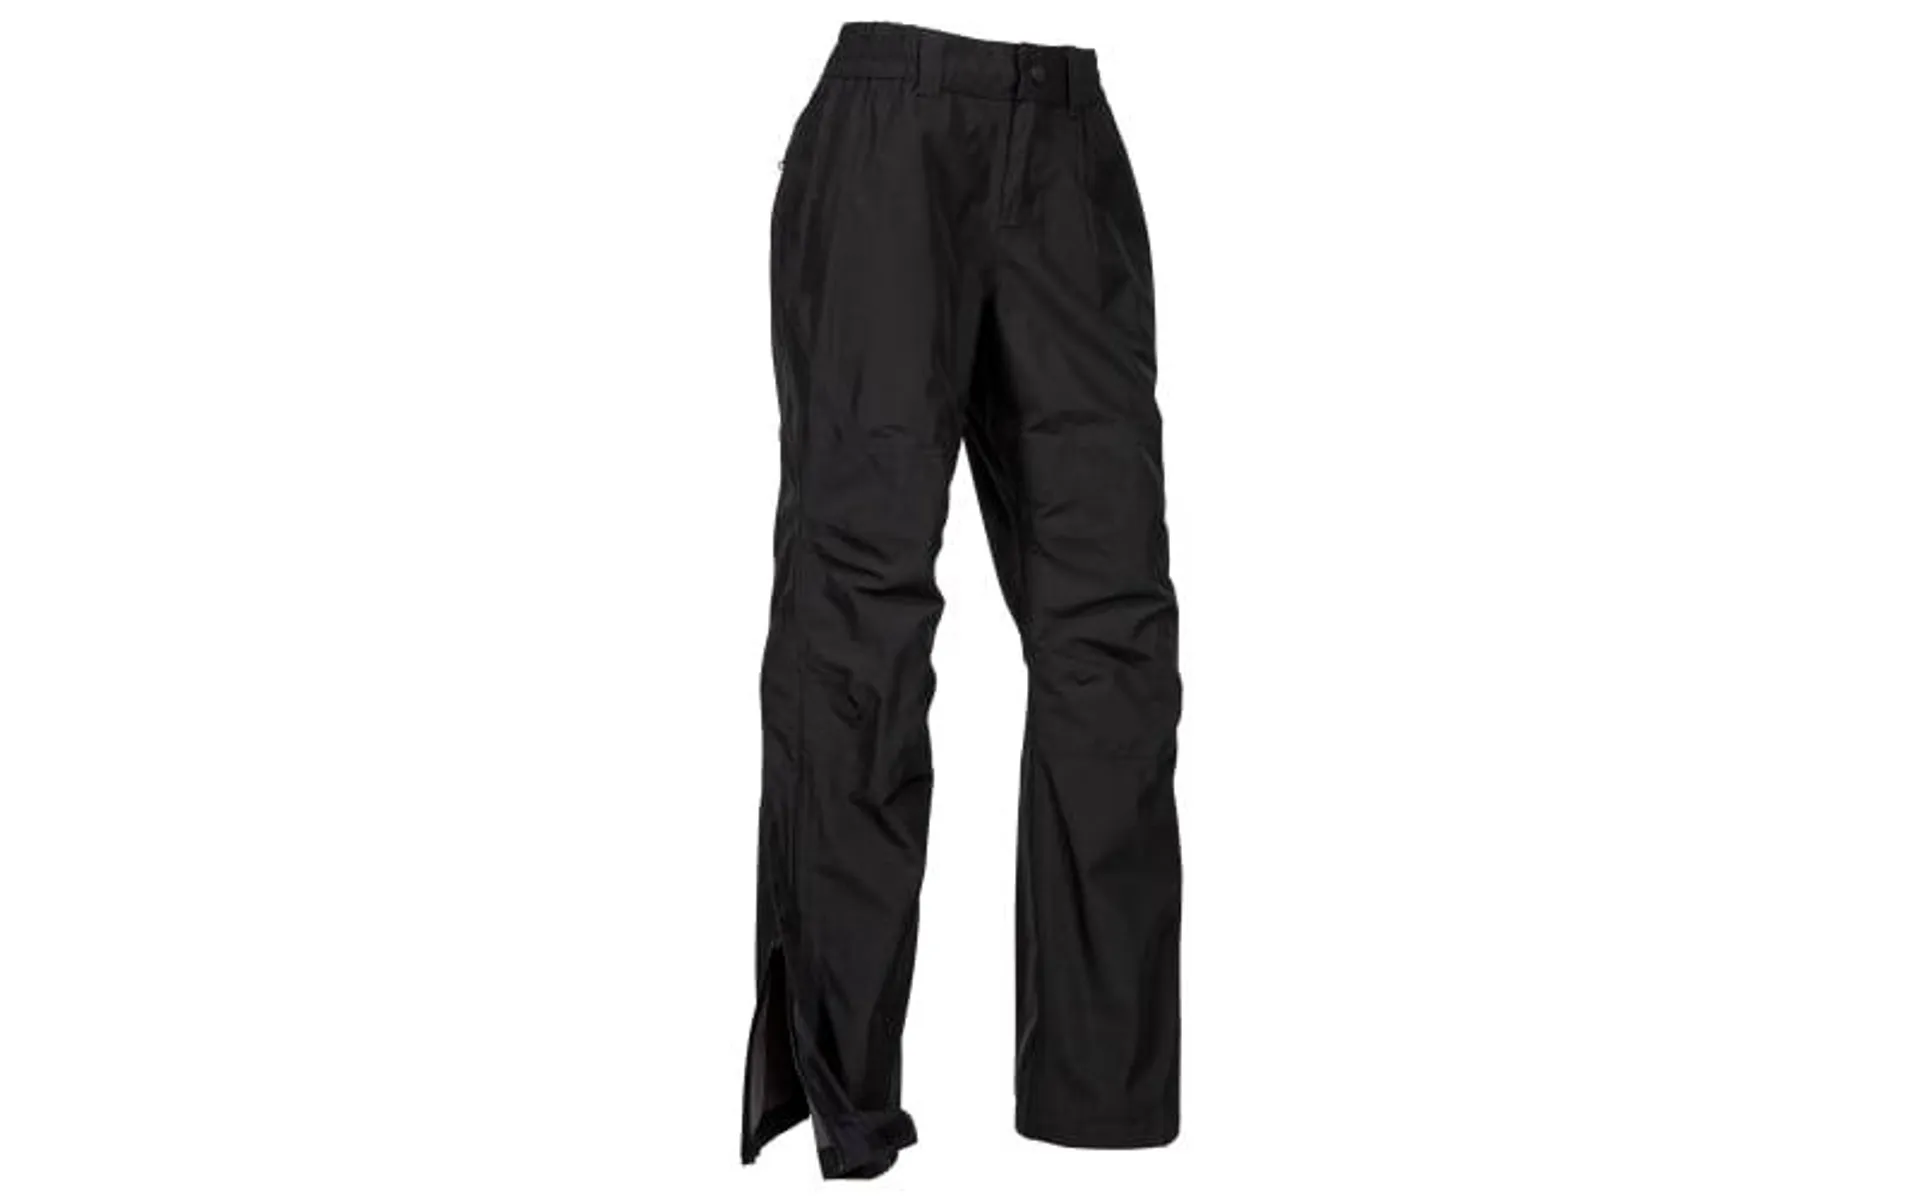 Johnny Morris Bass Pro Shops Guidewear Rainy River Pants with GORE-TEX PacLite for Ladies